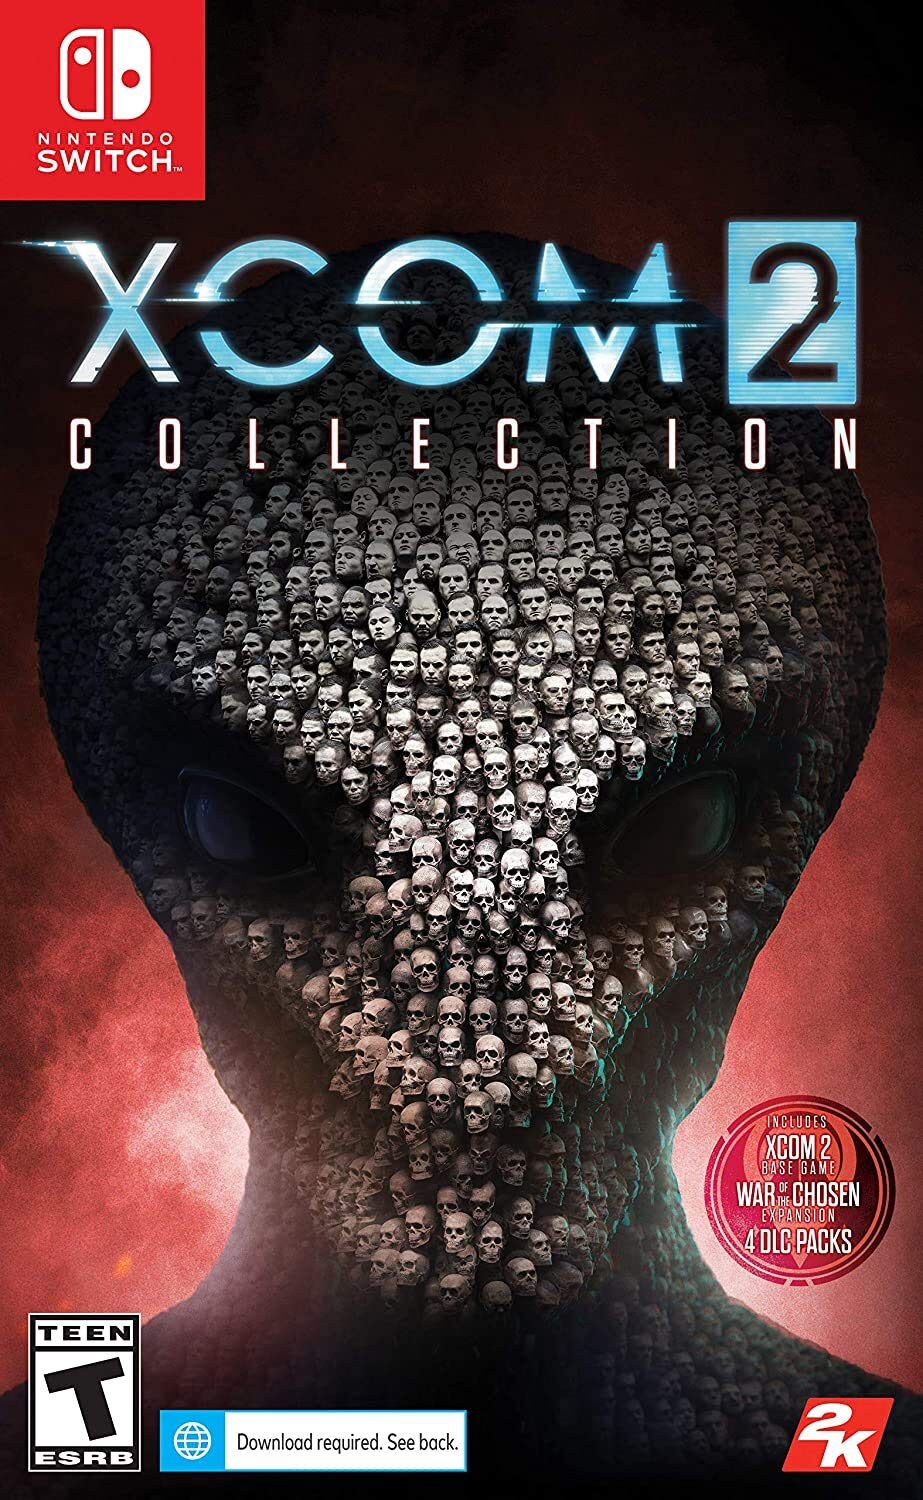 Xcom 2 Collection, Take Two for Nintendo Switch - image 1 of 1